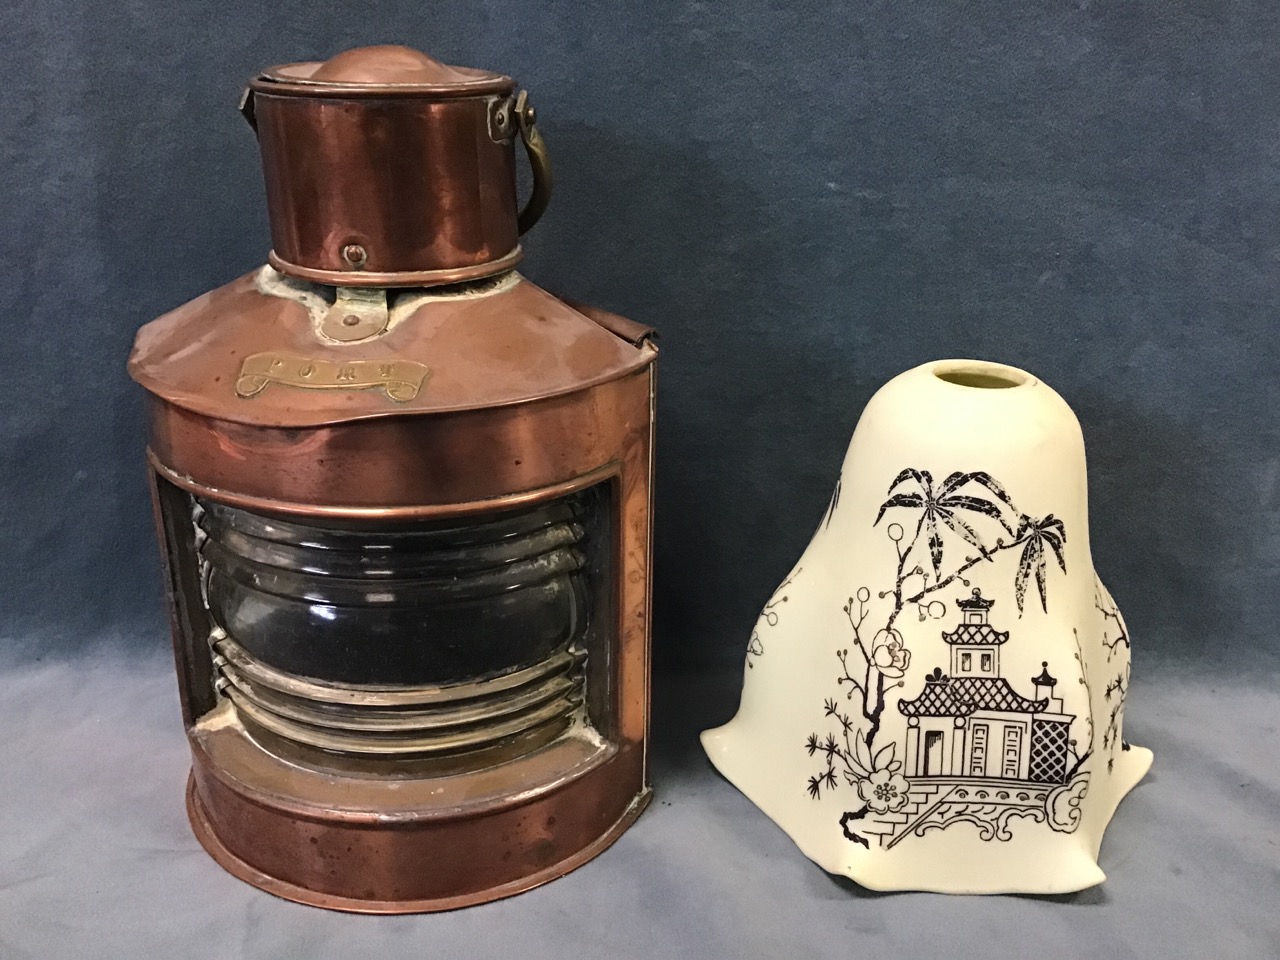 A copper and brass port ships lantern with fresnel lens and sliding door panel - 10in; and a